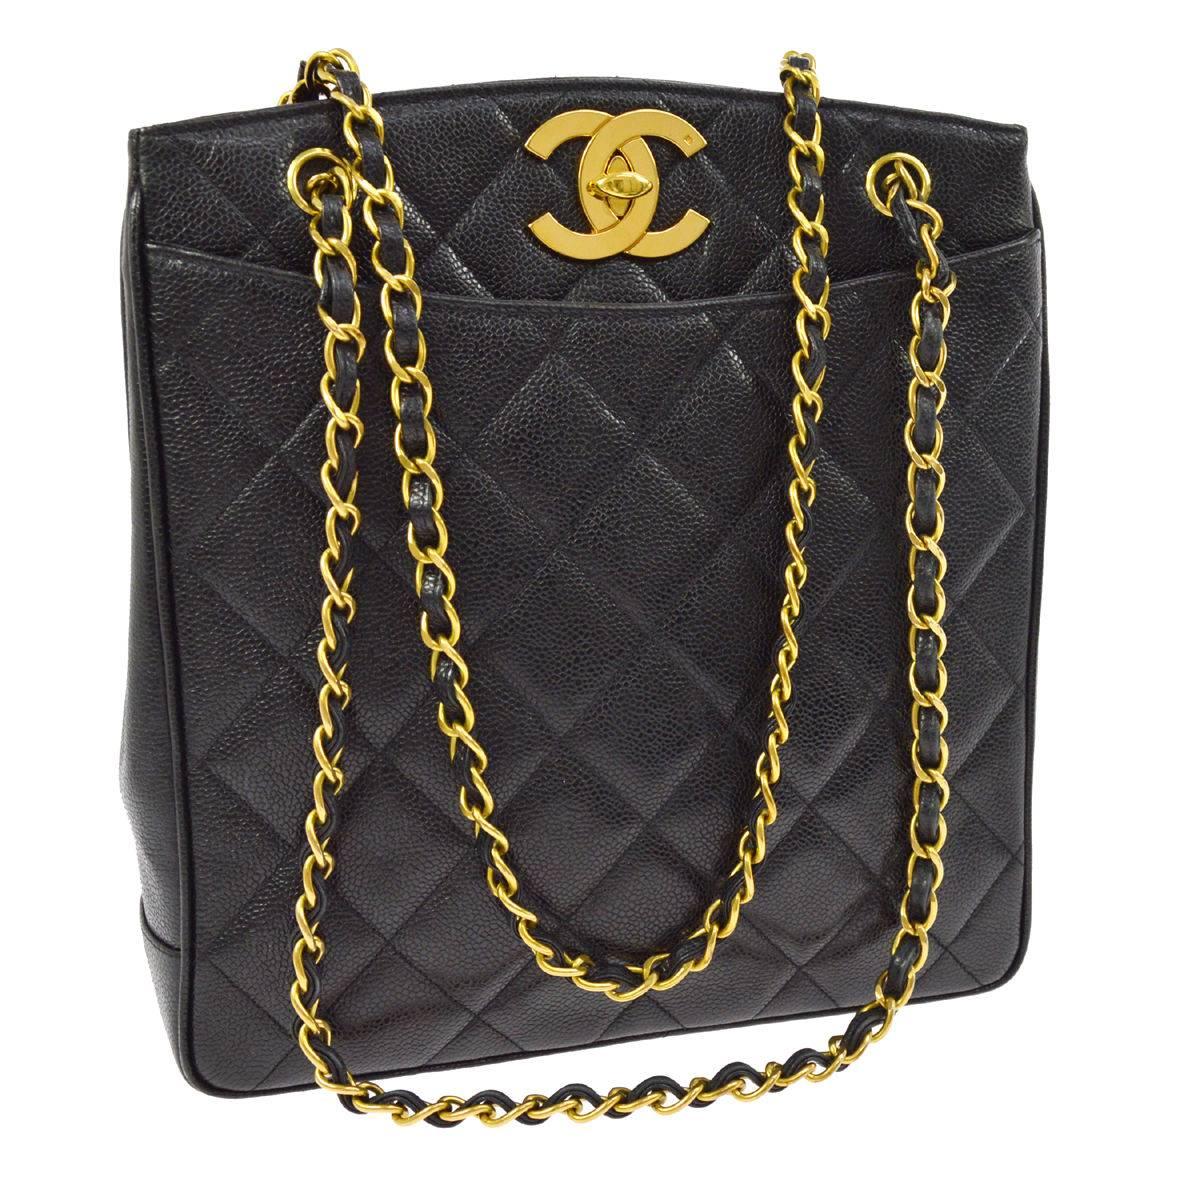 Chanel Rare Black Caviar Quilted Gold Shopper Carryall Tote Shoulder Bag